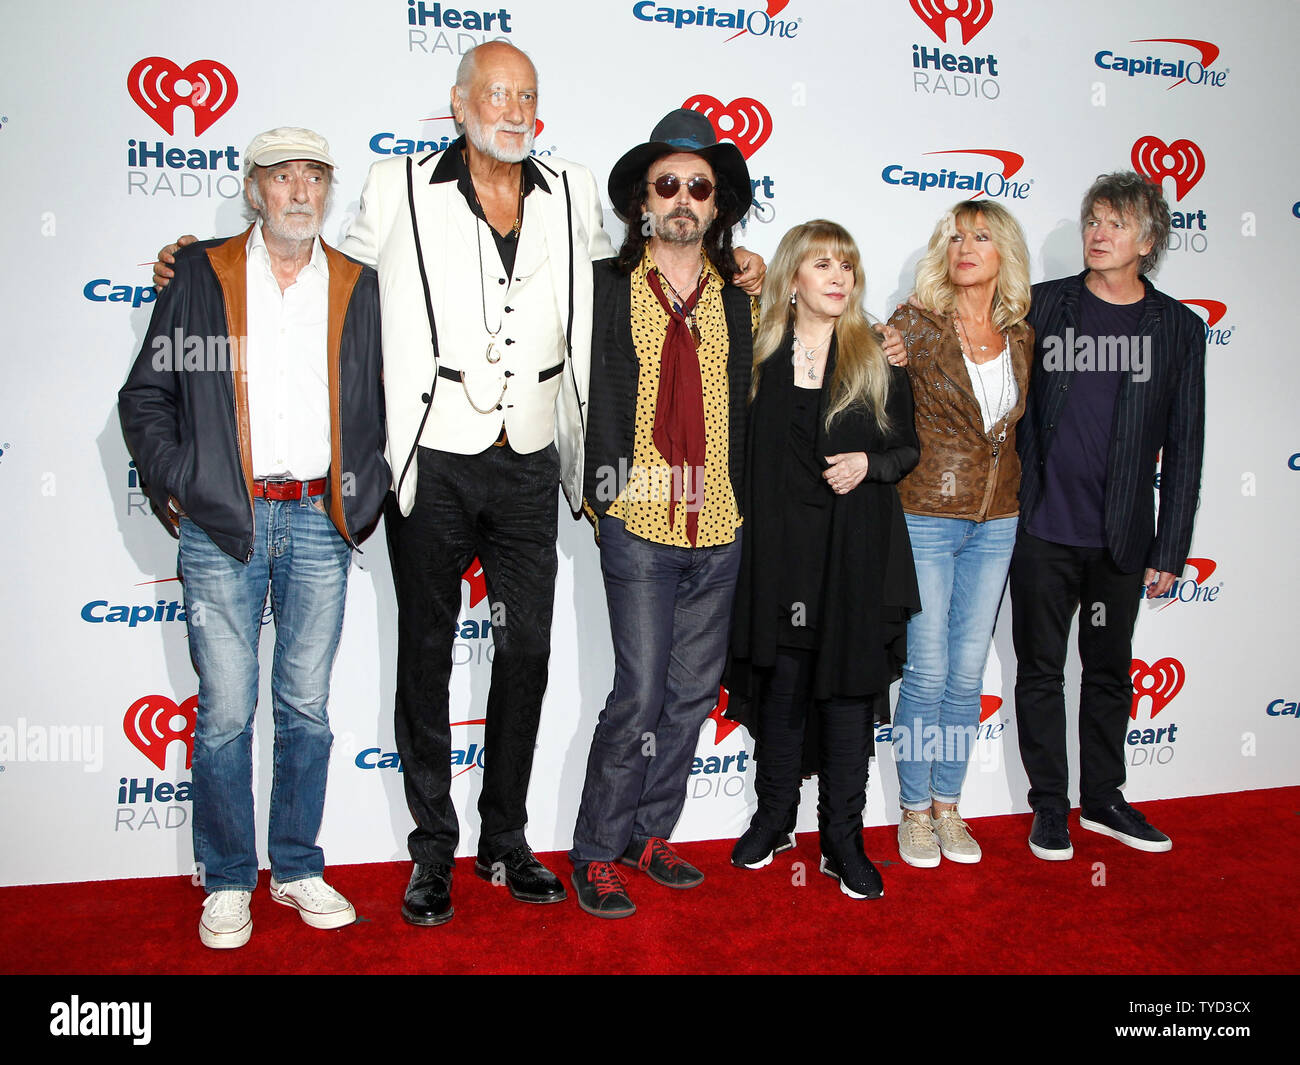 John McVie, Mick Fleetwood, Mike Campbell, Stevie Nicks, Christine McVie and Neil Finn of Fleetwood Mac arrive for the iHeartRadio Music Festival at the T-Mobile Arena in Las Vegas, Nevada on September 21, 2018.  Photo by James Atoa/UPI Stock Photo